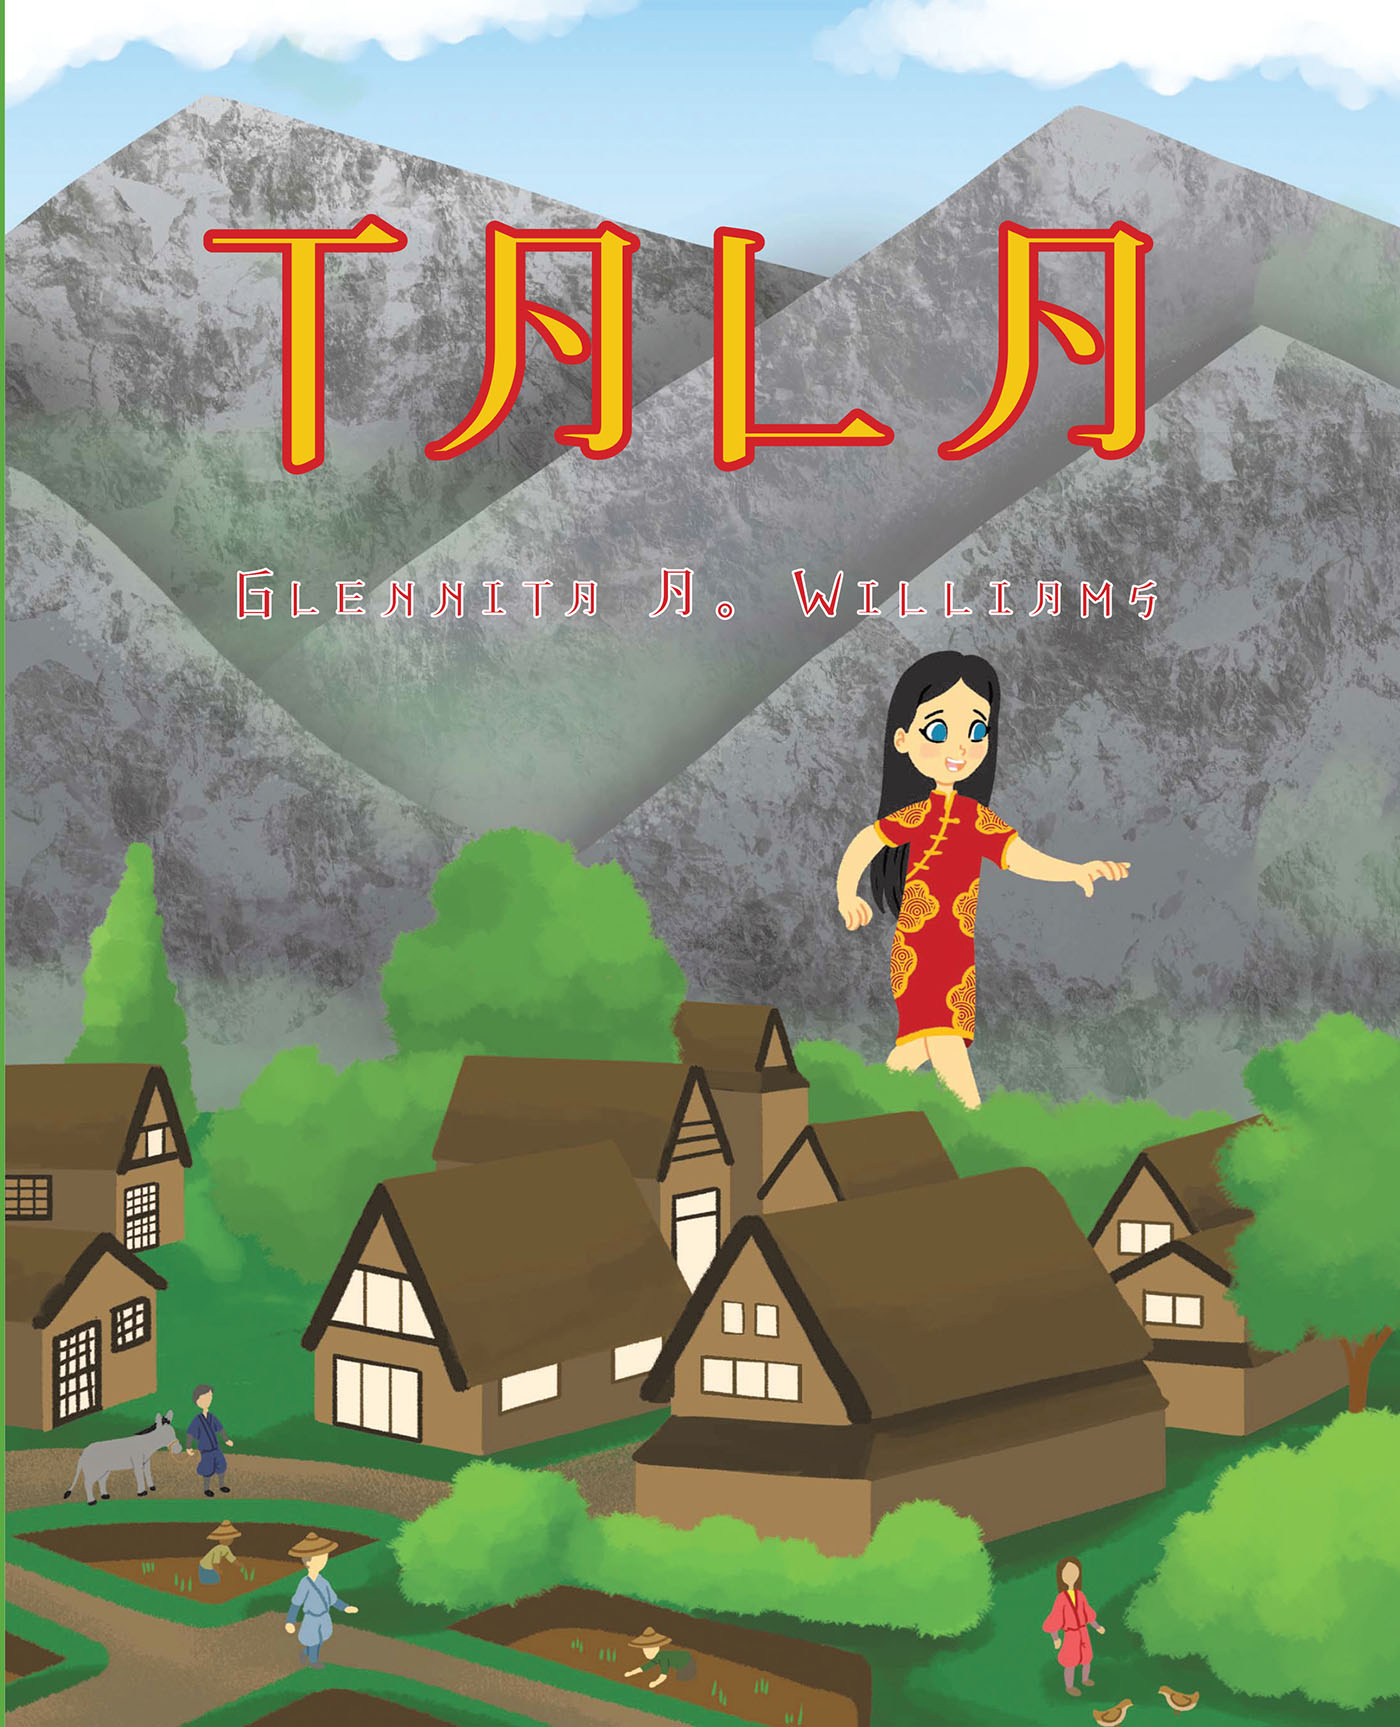 Glennita A. Williams’s Newly Released "Tala" is a Creative Folk-Tale Style Narrative That Explores the Issues with Bullying